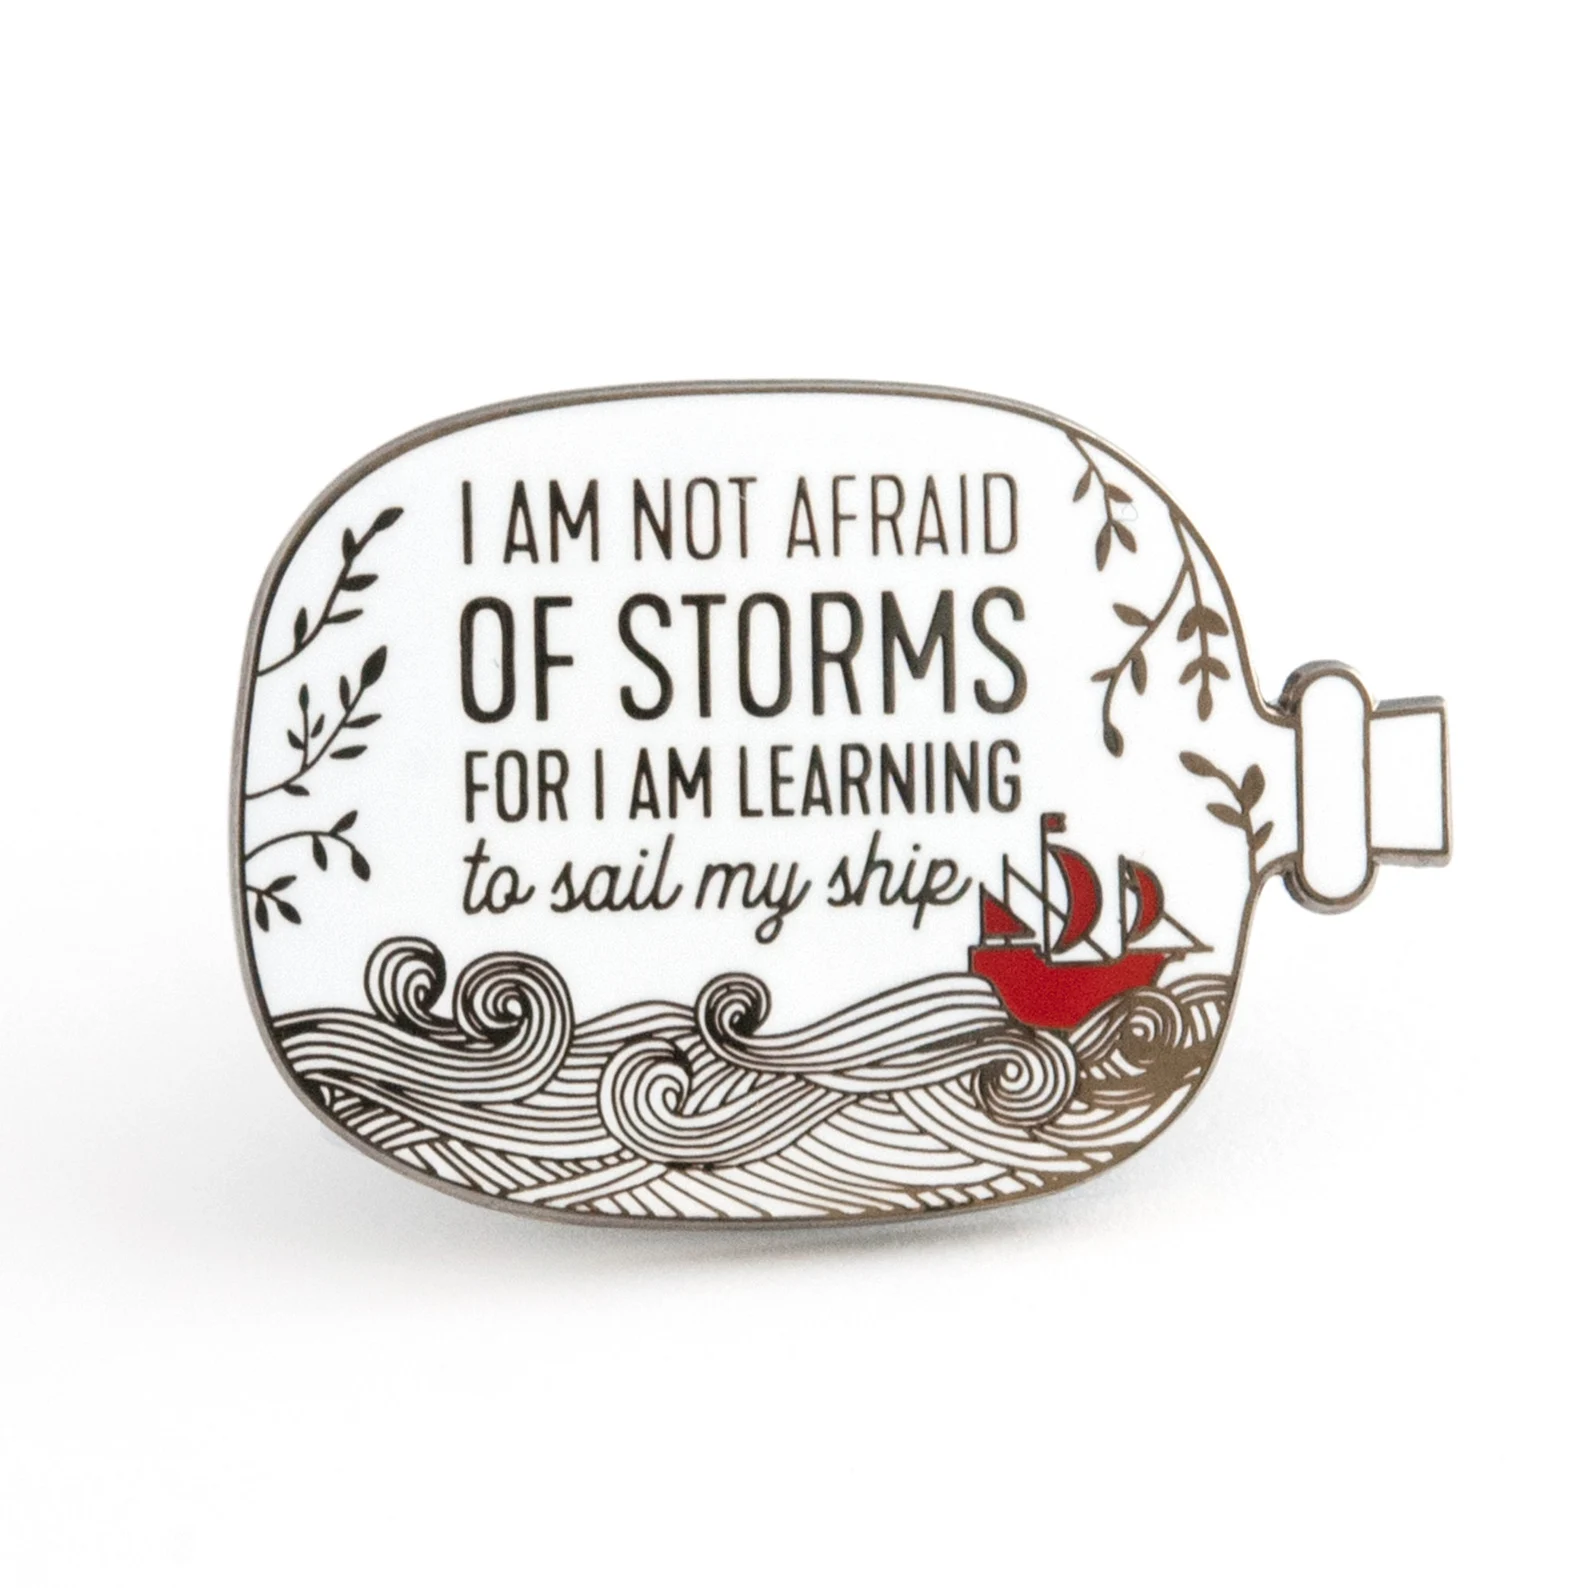 An enamel pin in the shape of a ship in a bottle that reads "I am not afraid of storms for I am learning to sail my ship"